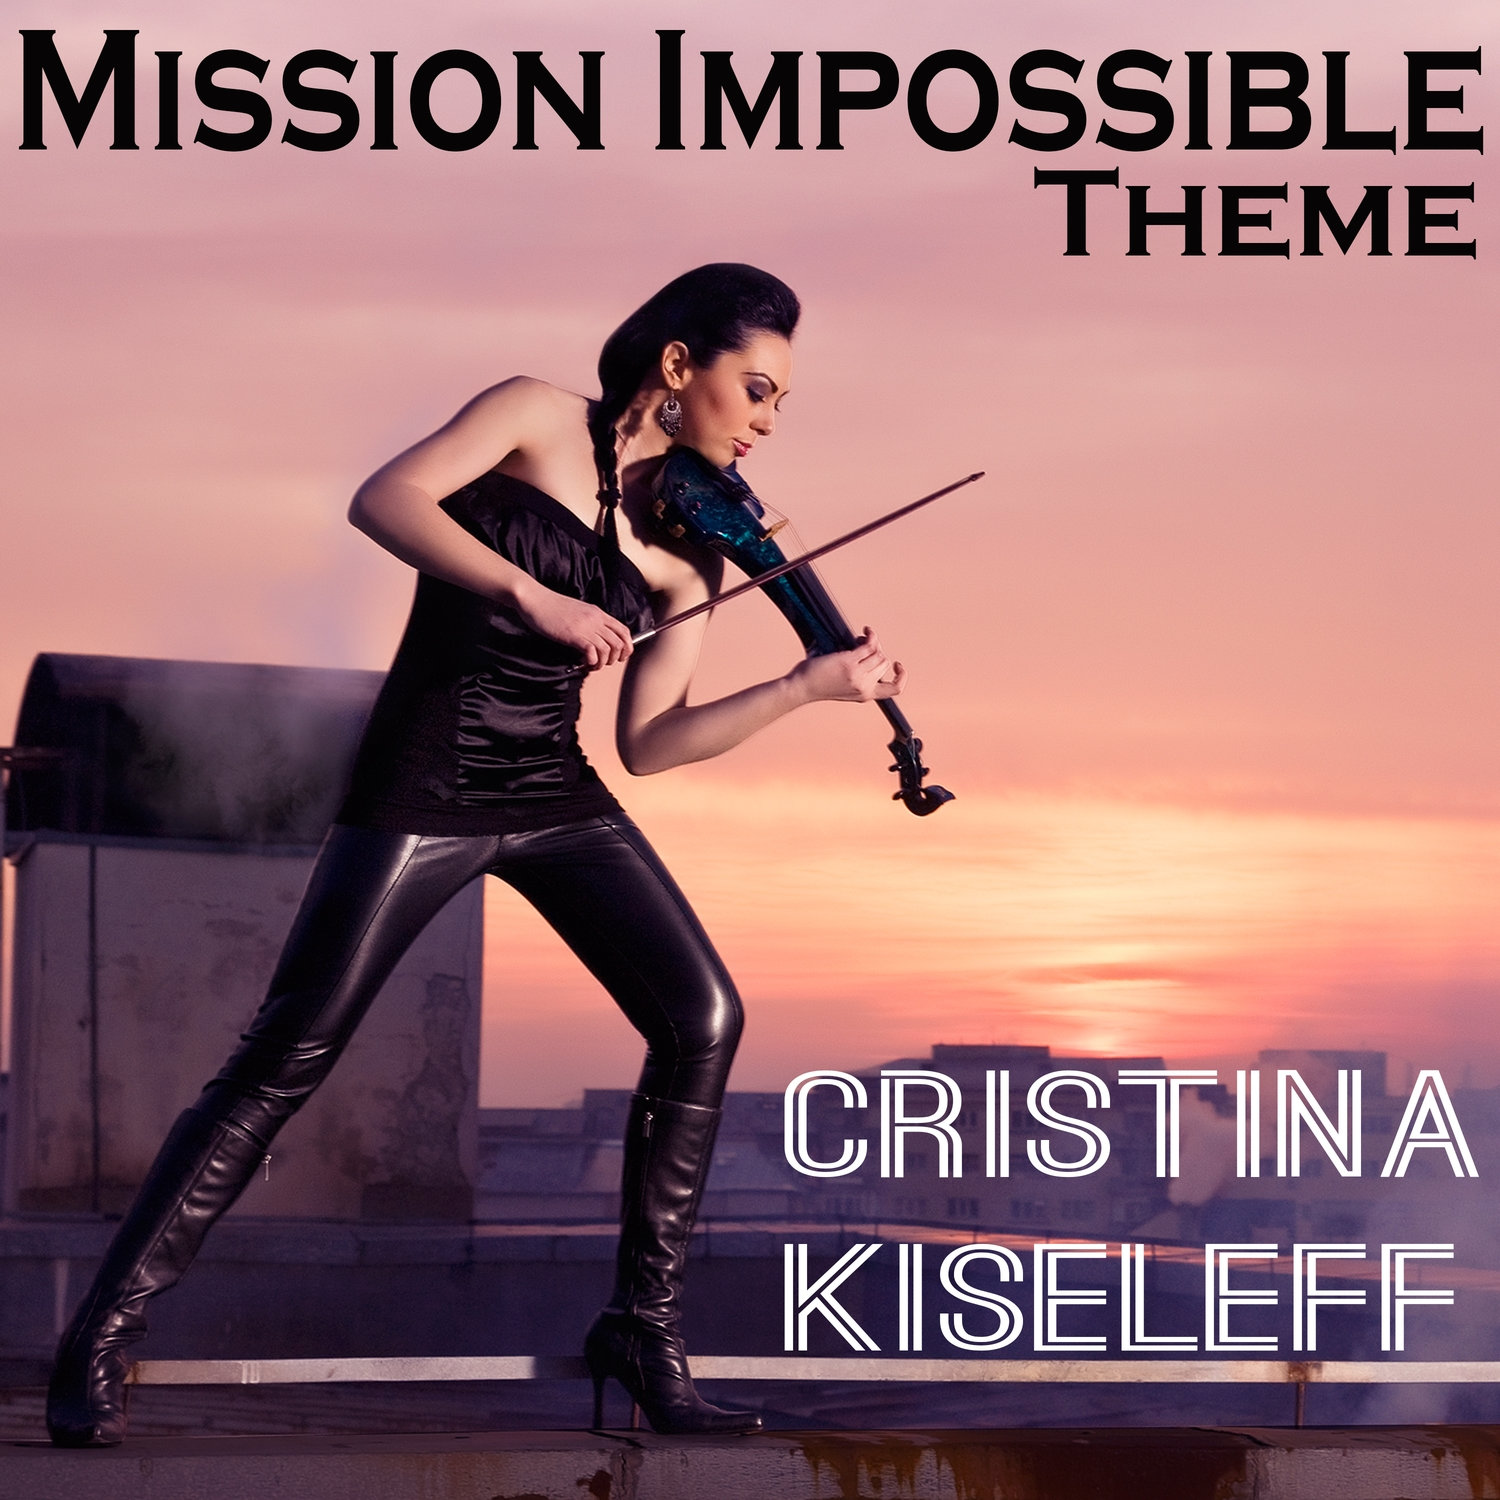 Mission Impossible Theme. Theme from Mission: Impossible. Миссия невыполнима песня. Mission Impossible Theme (Full.